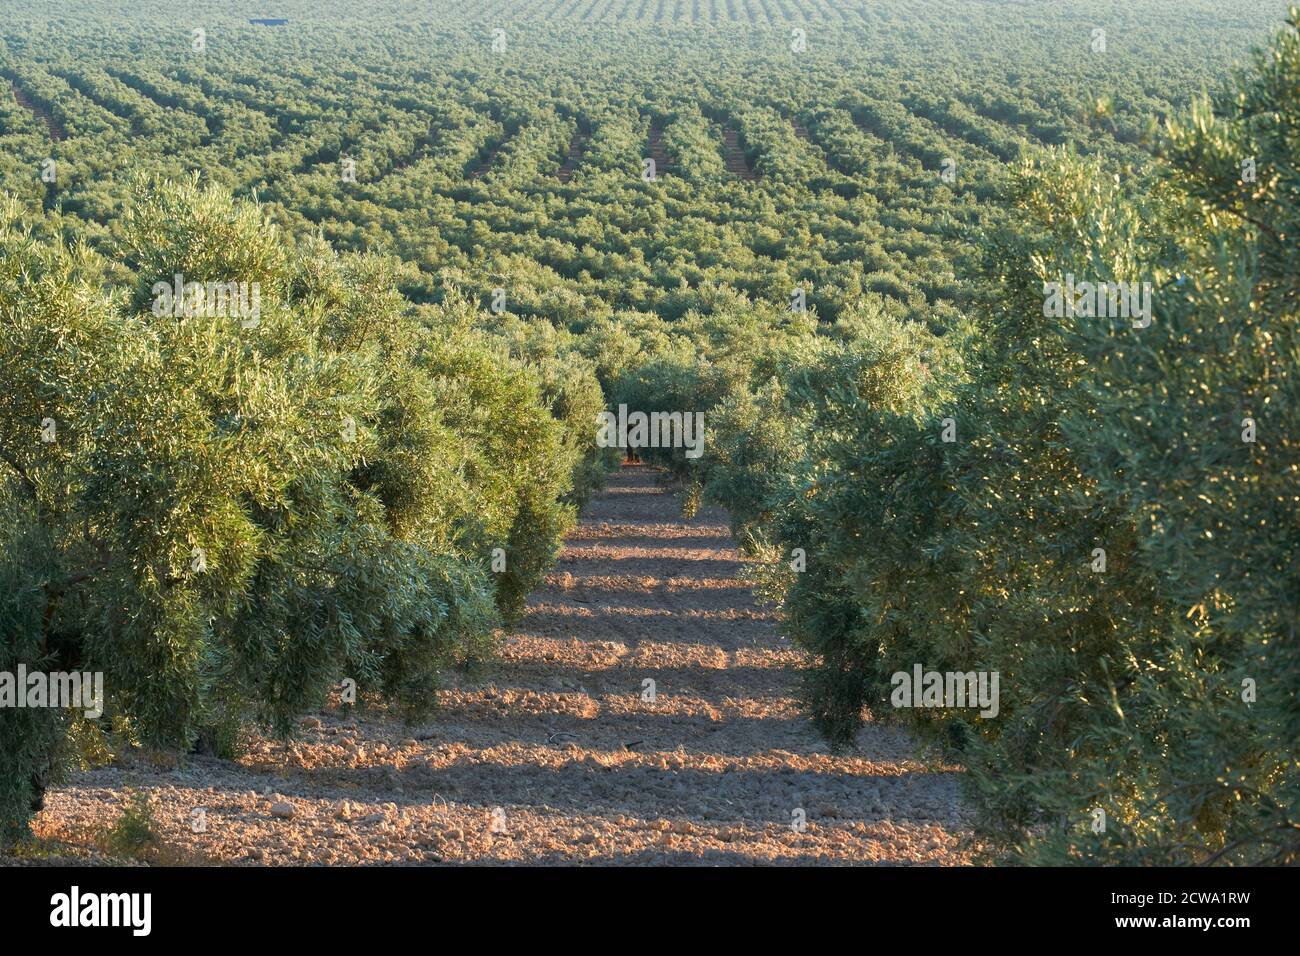 olive groves destined for the production of olive oil in Puente Genil, Cordoba. Spain Stock Photo